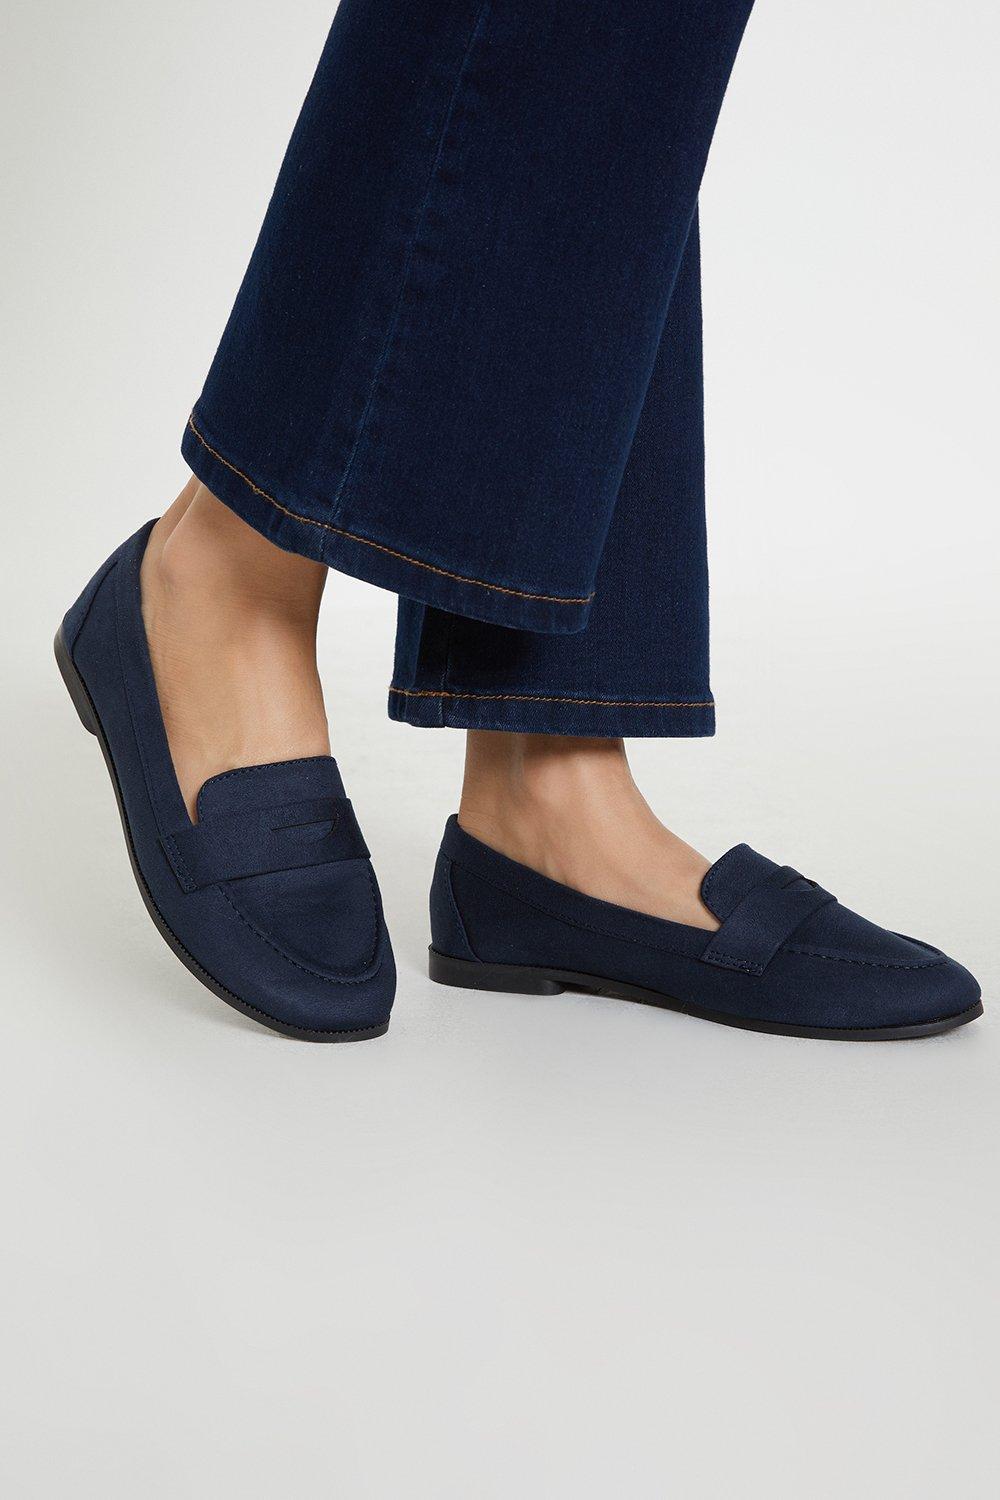 Women's Wide Fit Lana Penny Loafers - navy - 6